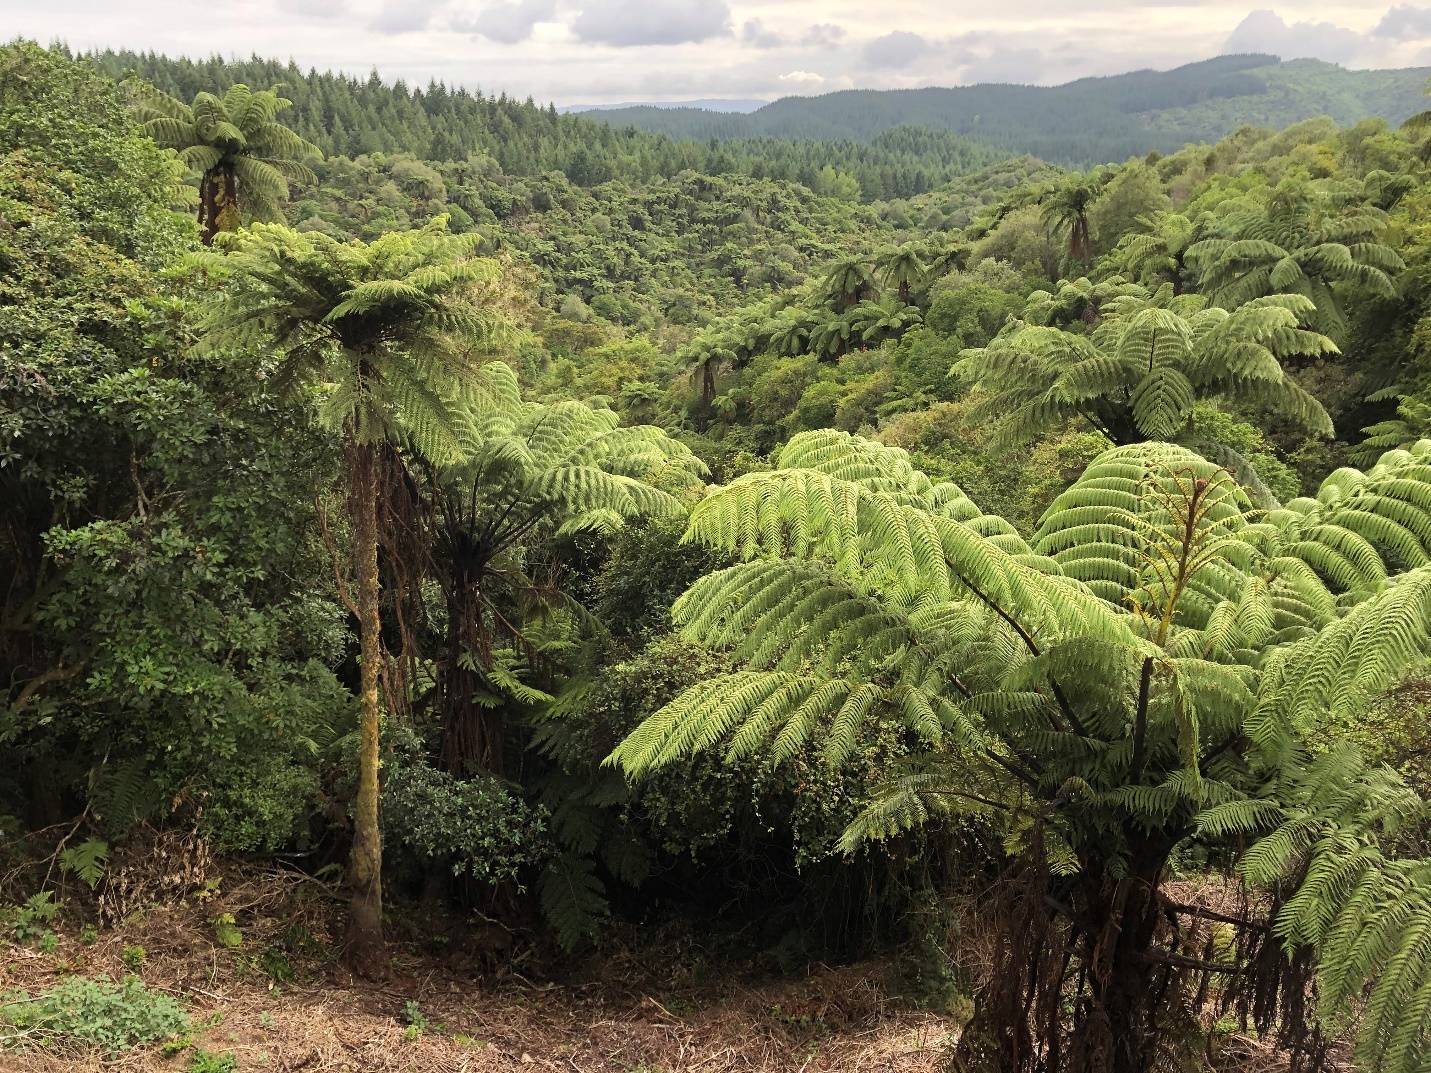 A thick tree fern dominated forest in New Zealand. In New Zealand, the some of the most abundant “tree” species are ferns!